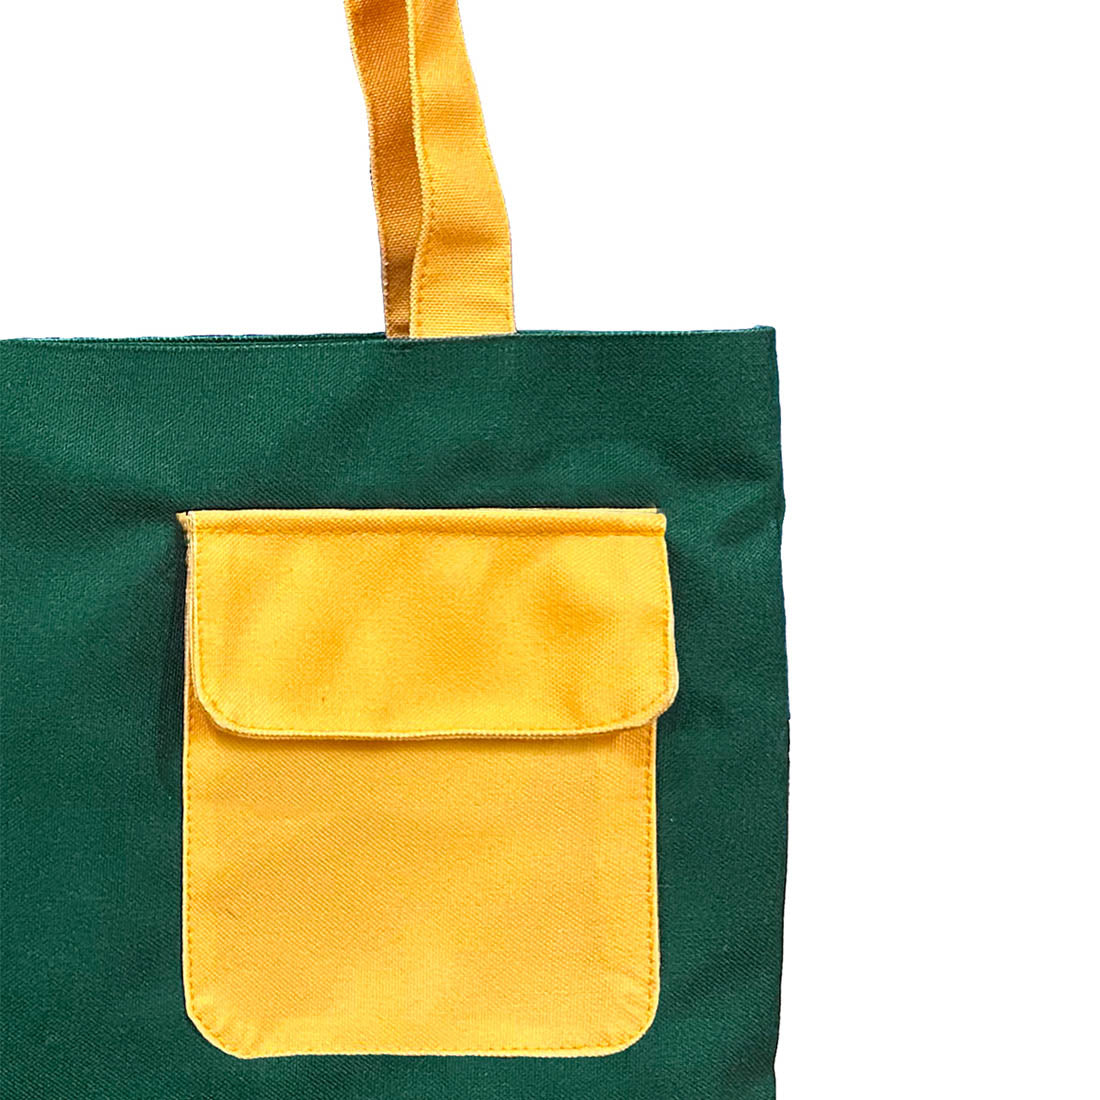 Stylish green and yellow tote bag featuring a convenient yellow pocket for easy access.